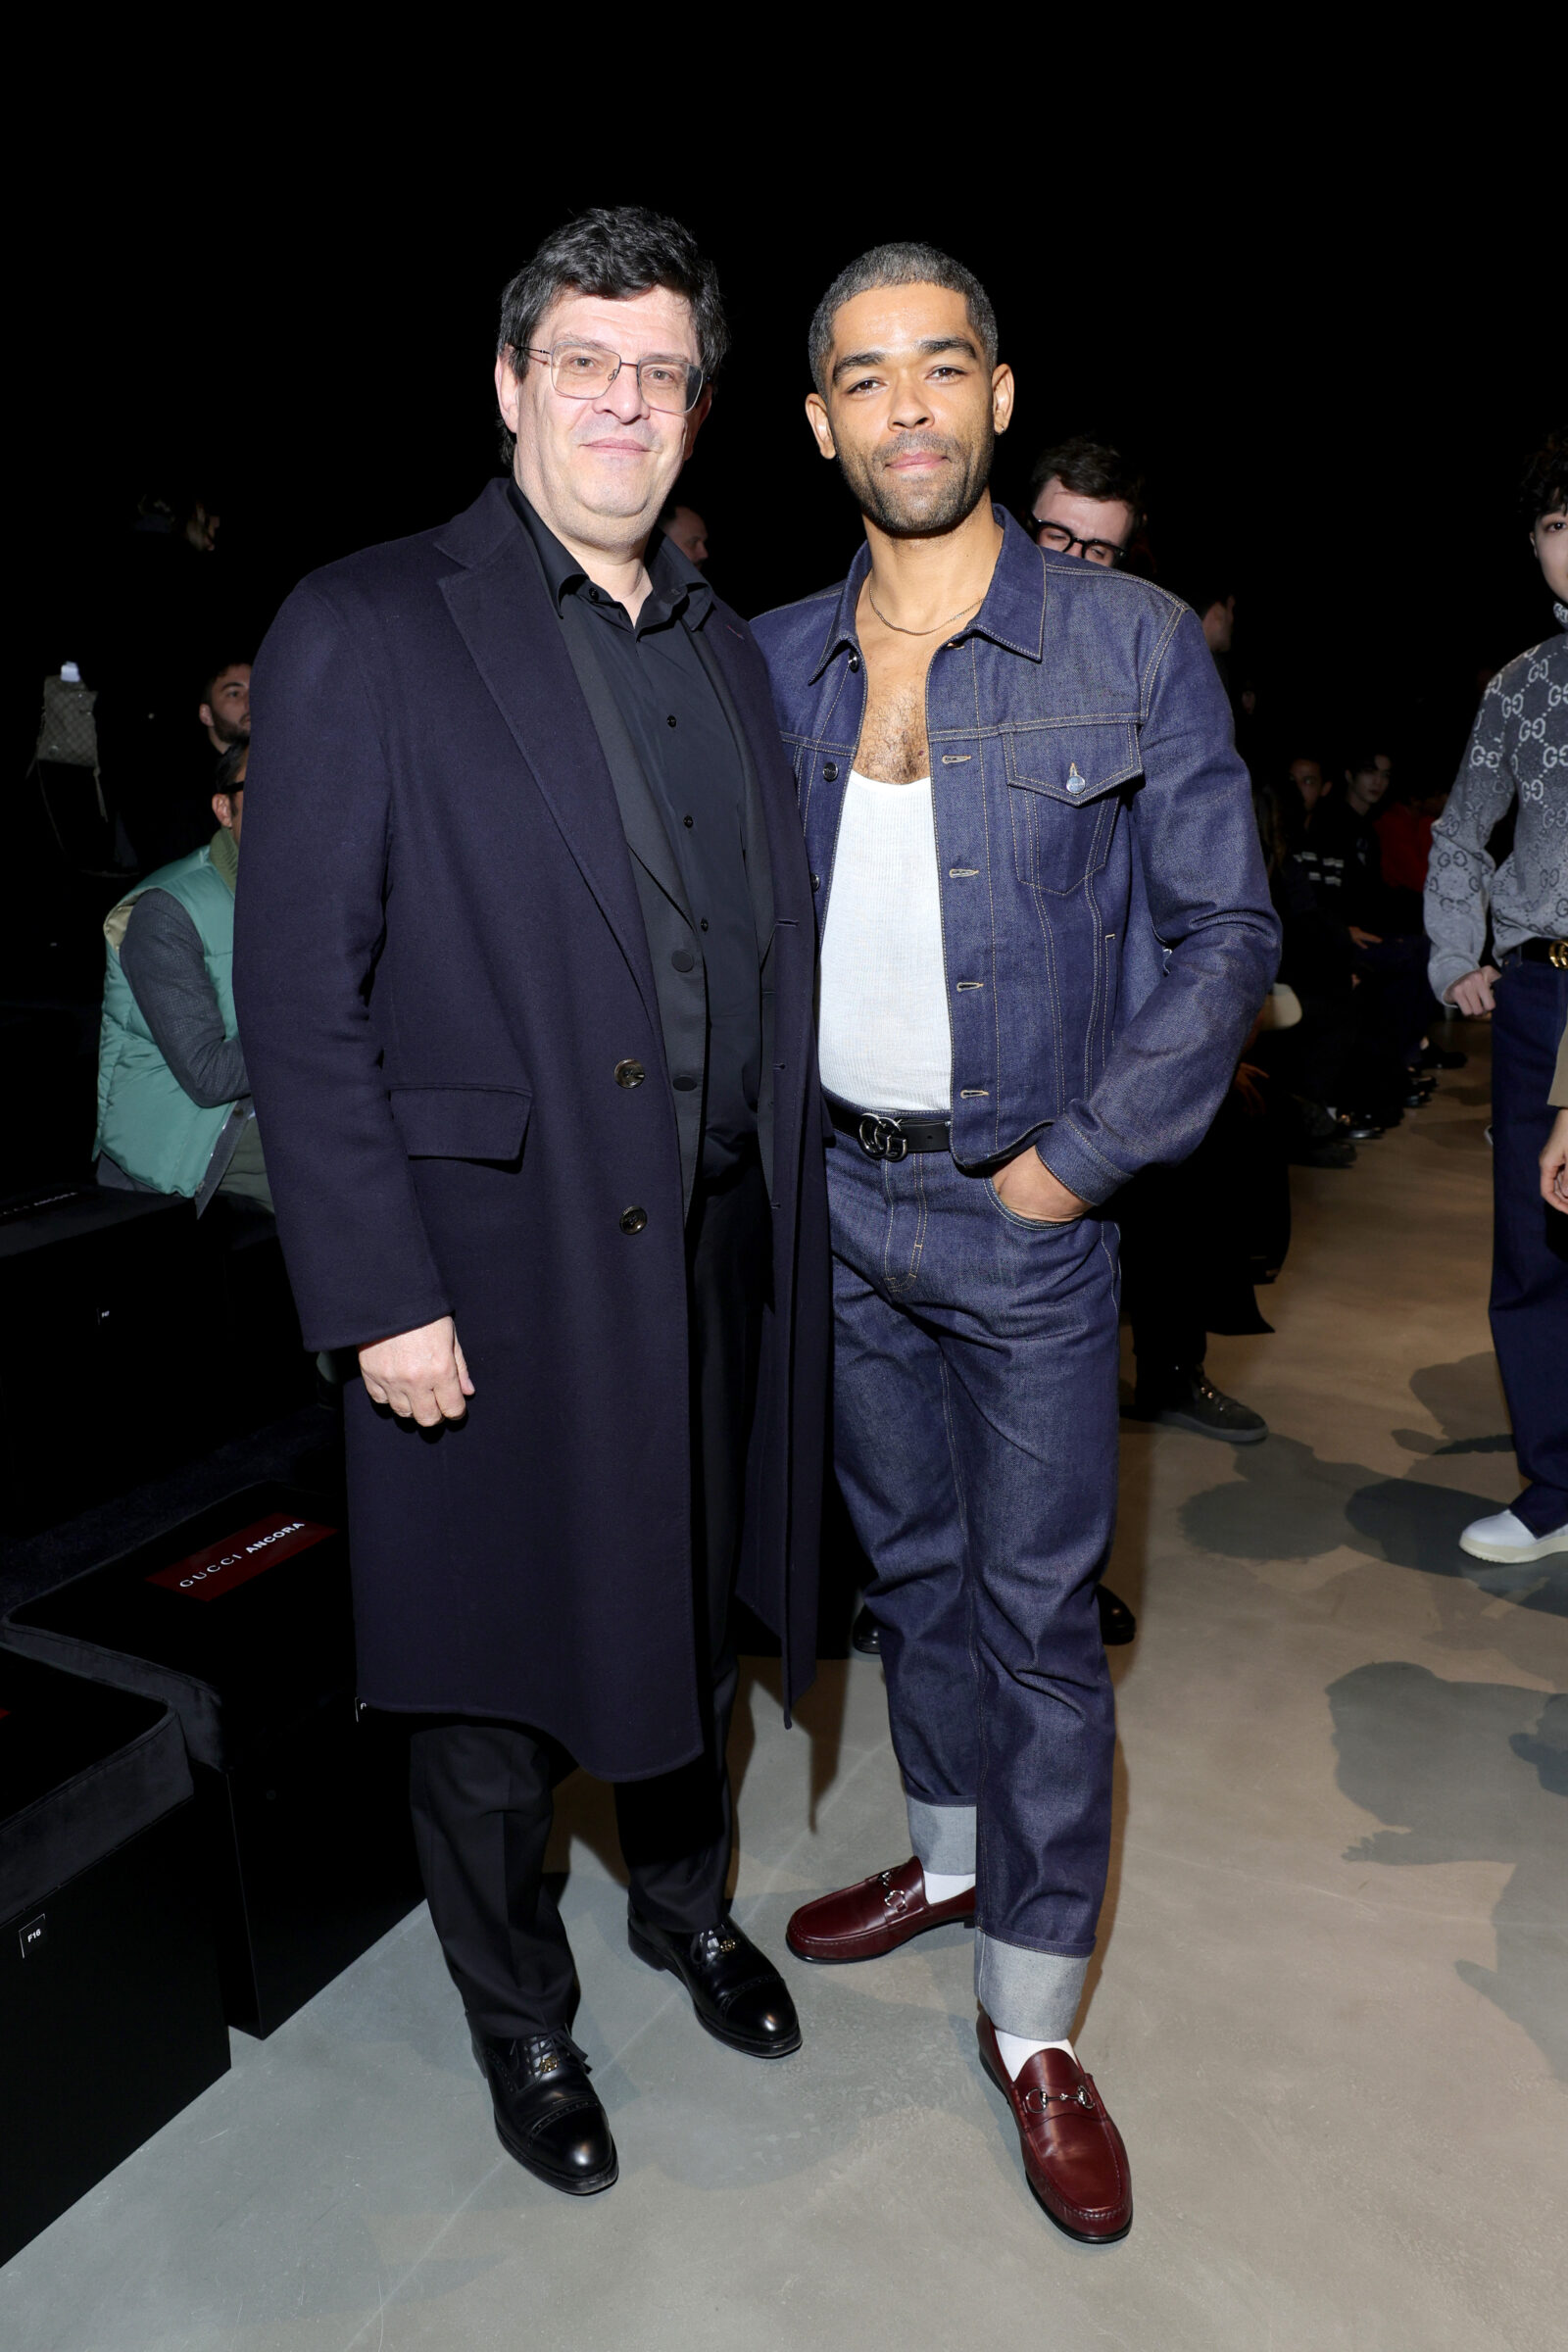 Jean-François Palus and Kingsley Ben-Adir attend the Gucci Ancora Fashion Show during Milan Fashion Week 